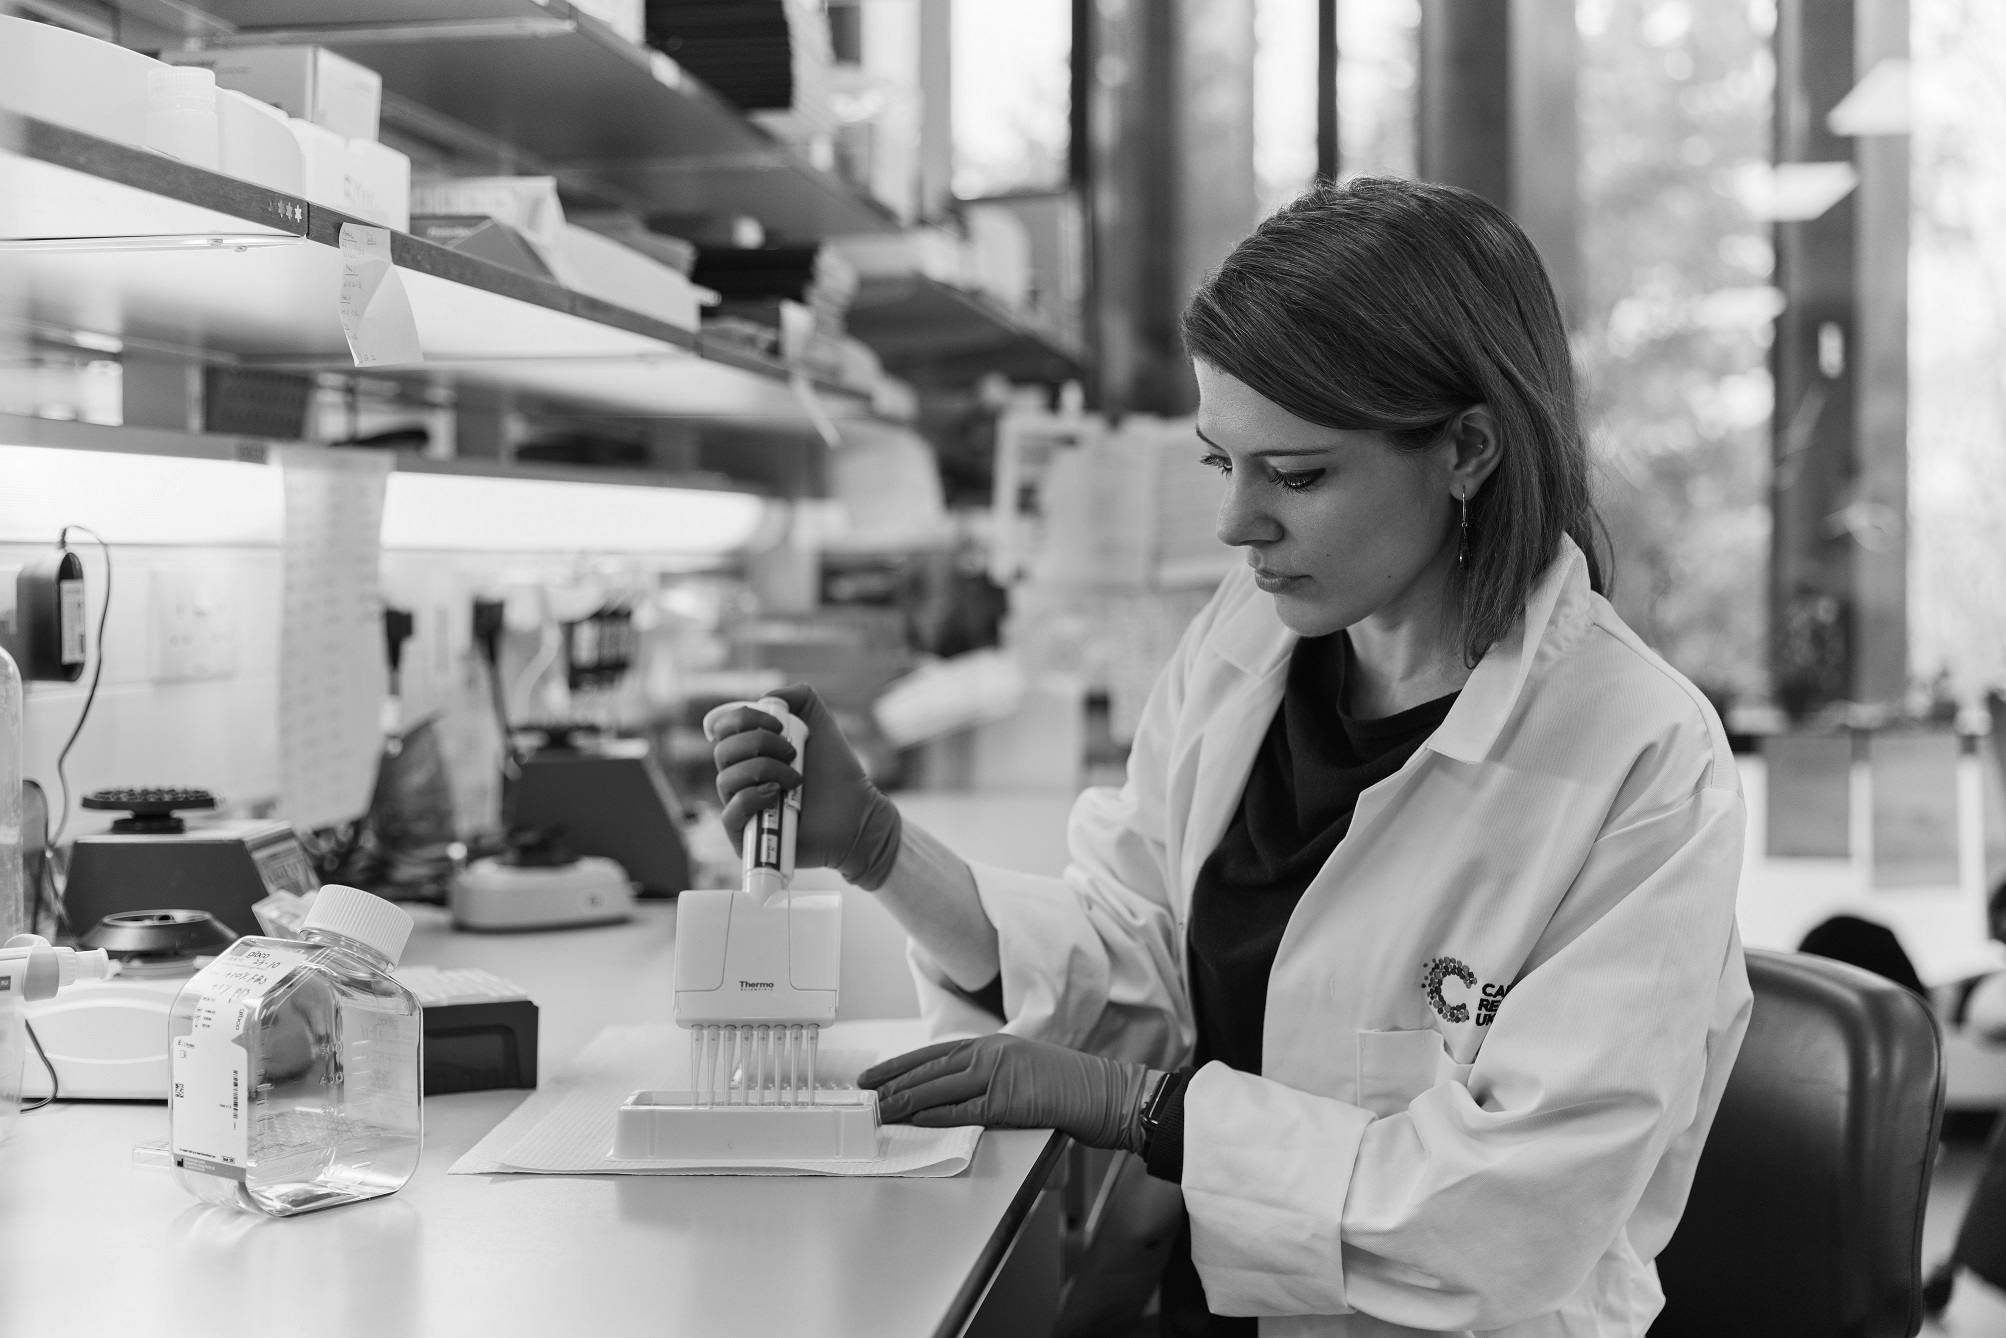 A Cancer Research UK researcher working in a lab.